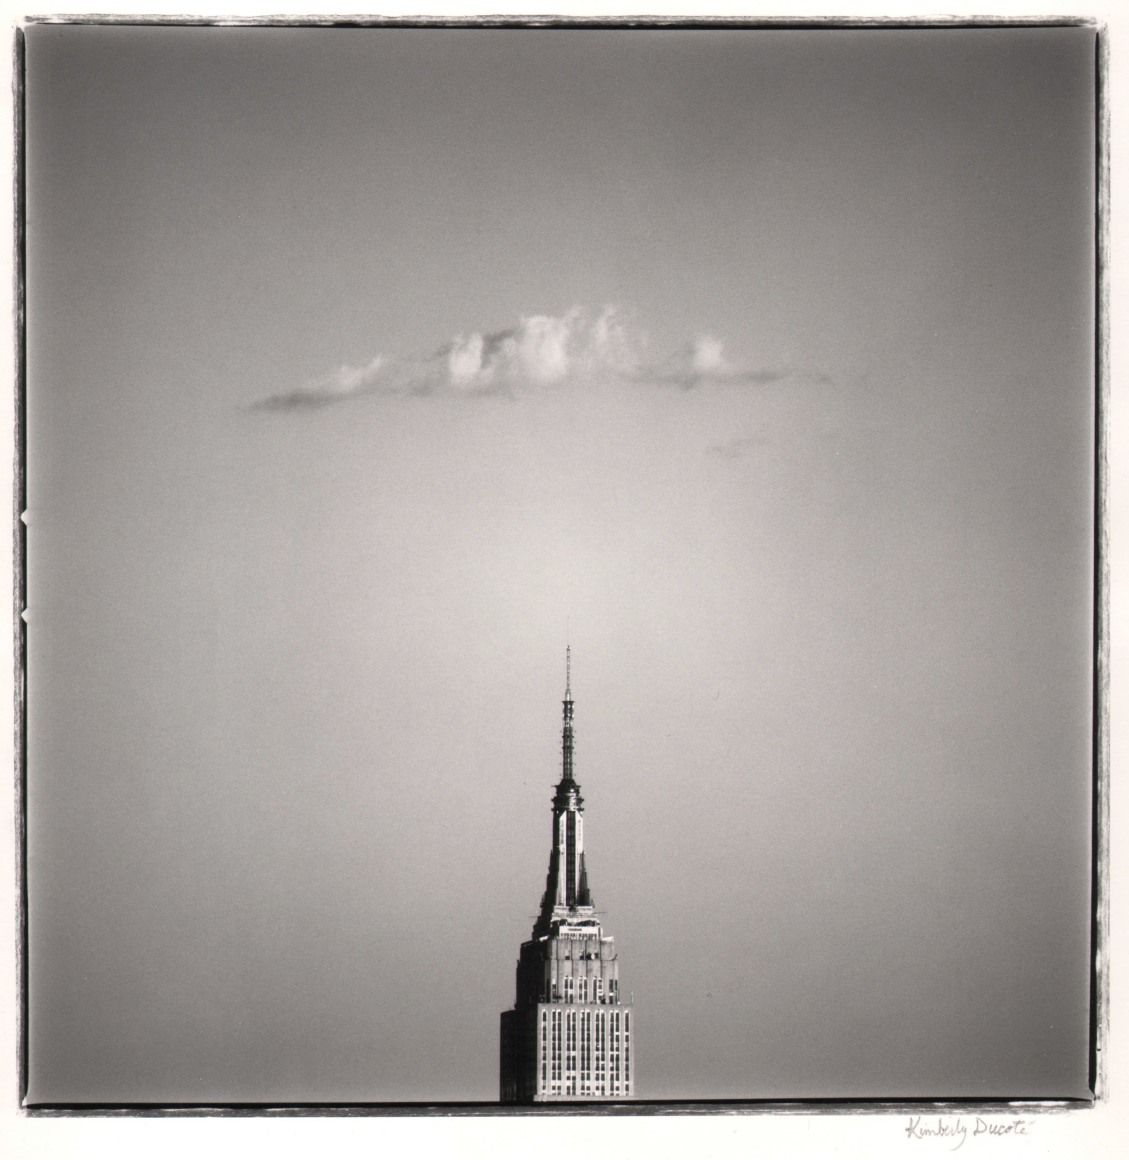 07. Kimberly Ducot&eacute;, Empire State Building, ​1990. Distant, head-on view of the top of the Empire State Building, which occupies the lower center of the frame. Above it is a single cloud.